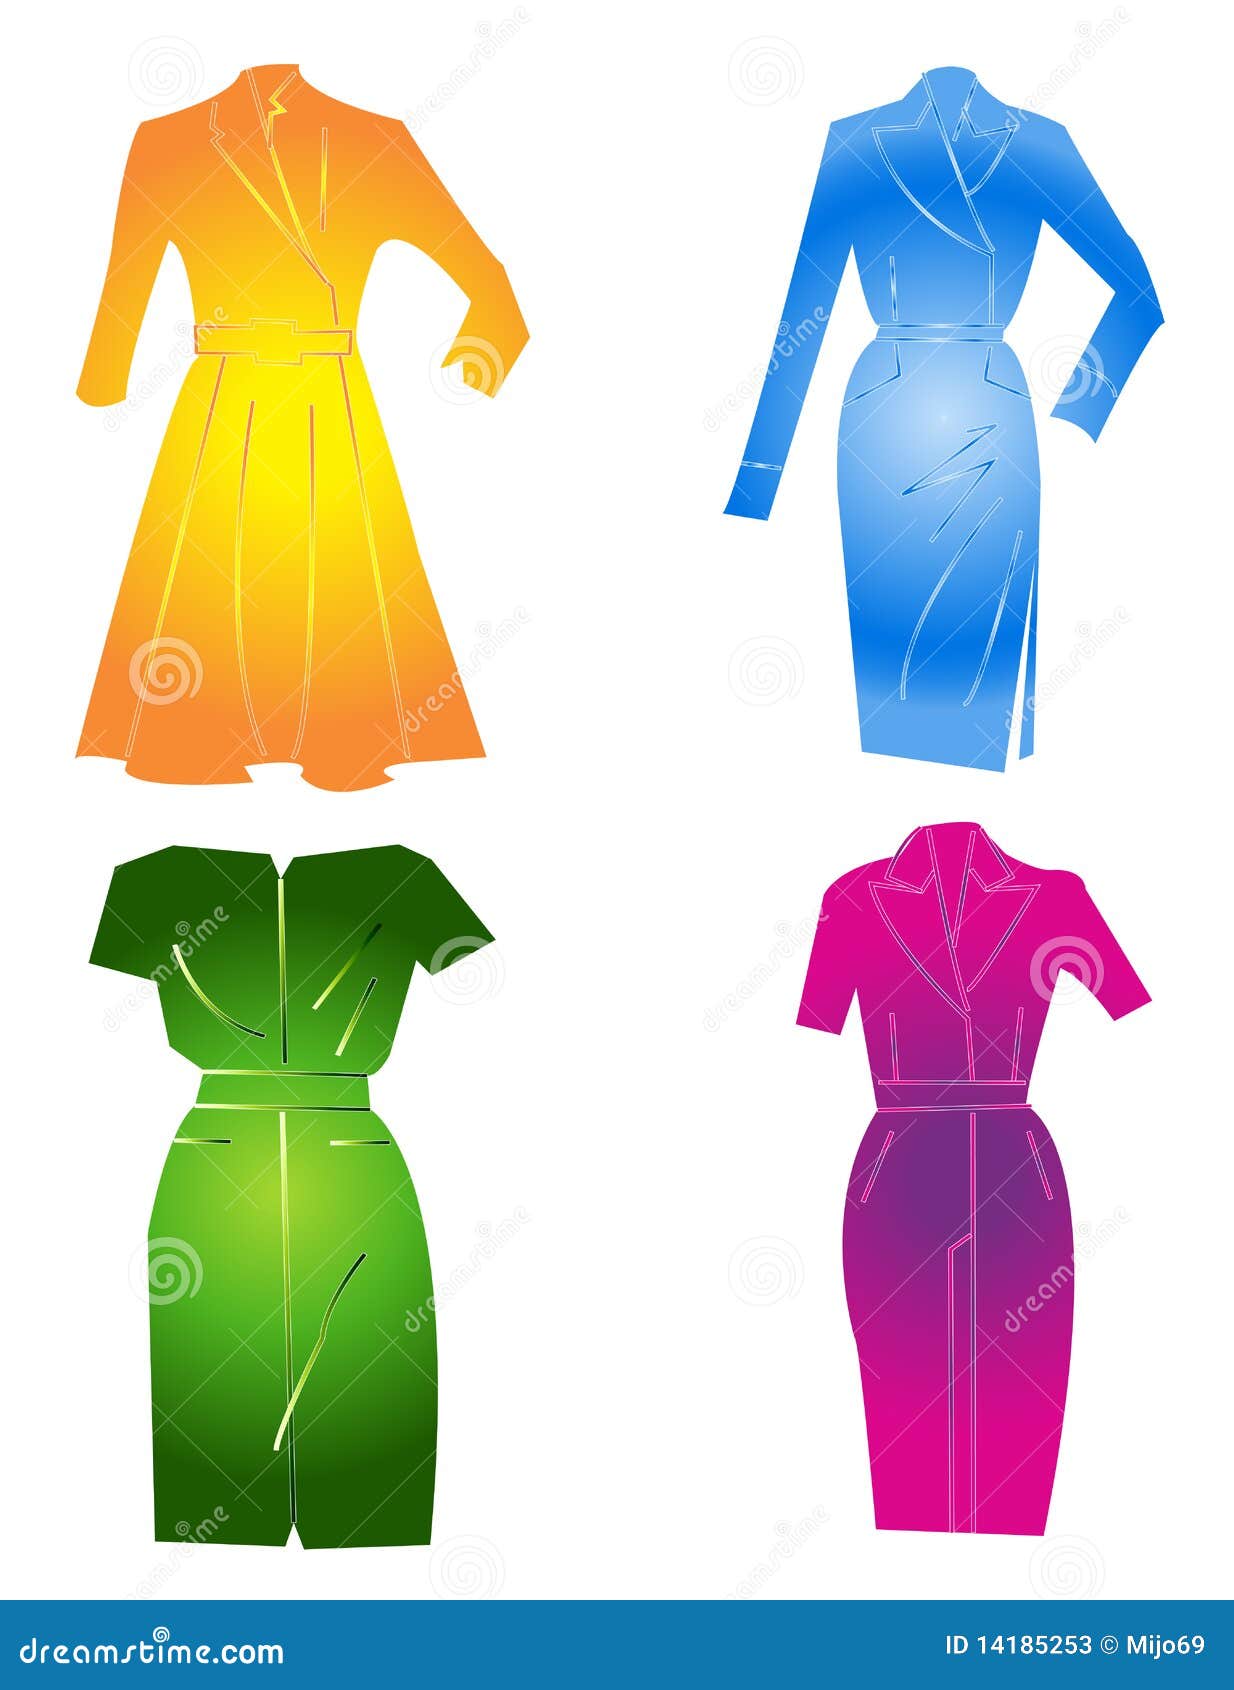 Four dresses in color stock vector. Illustration of clothes - 14185253